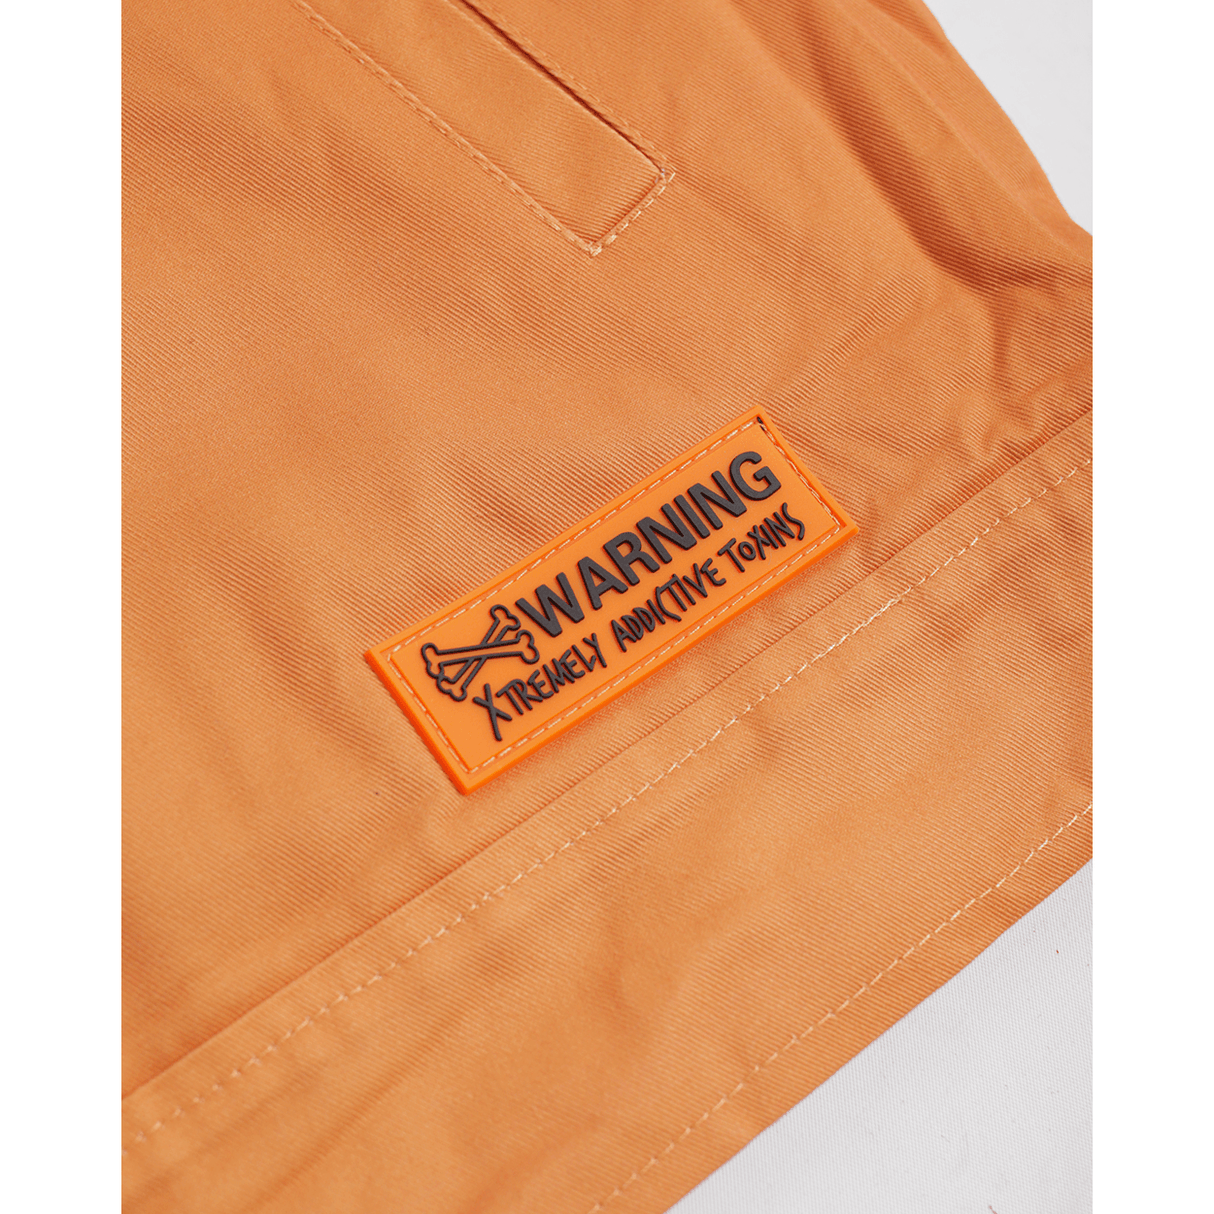 BRAND X ITS HOT IN THE VALLEY WORK JACKET - Allstarelite.com